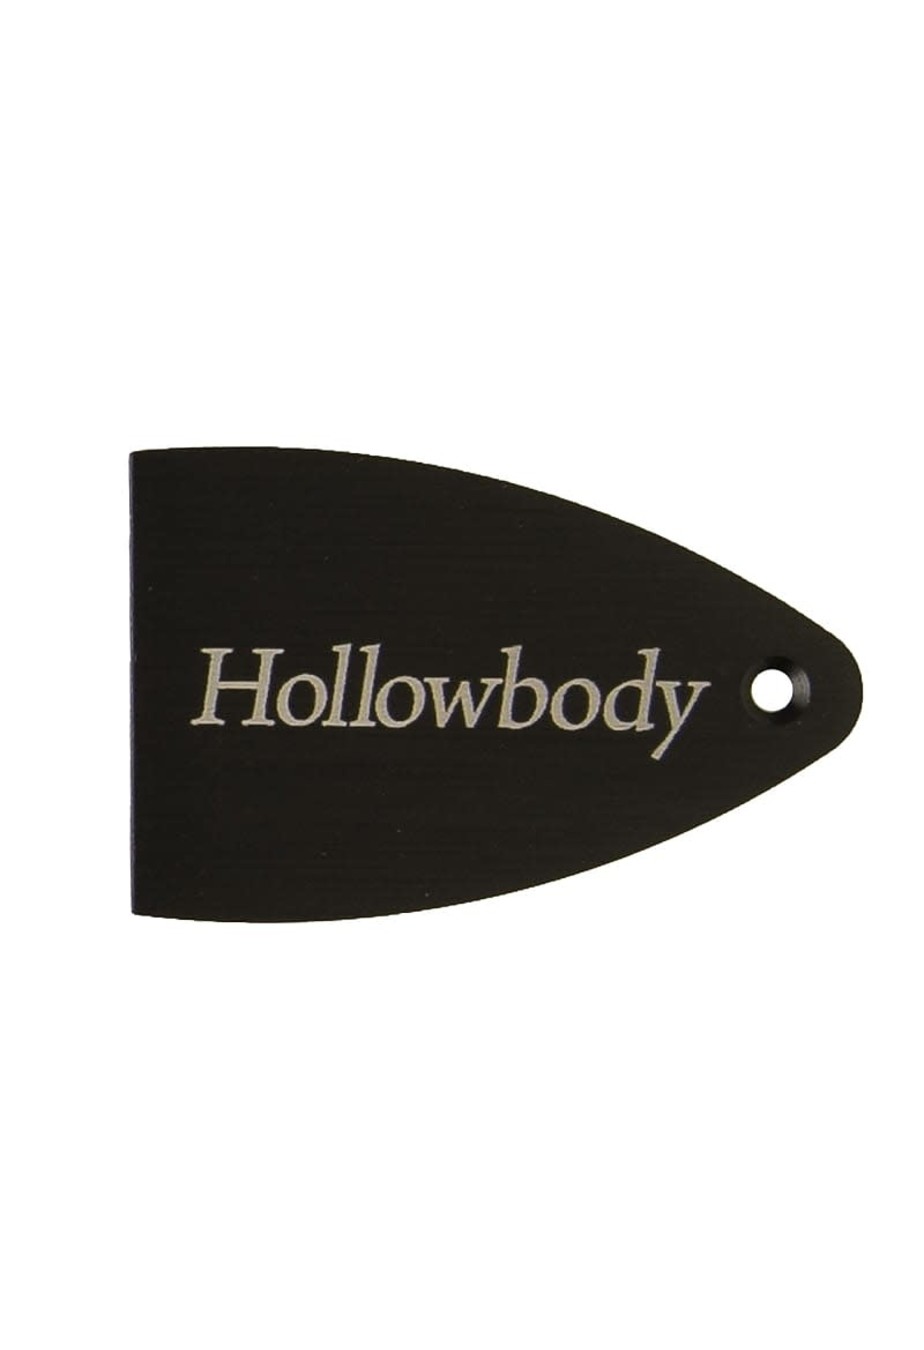 PRS Guitars Truss Rod Cover, Black Anodized Aluminum, Etched, Hollowbody